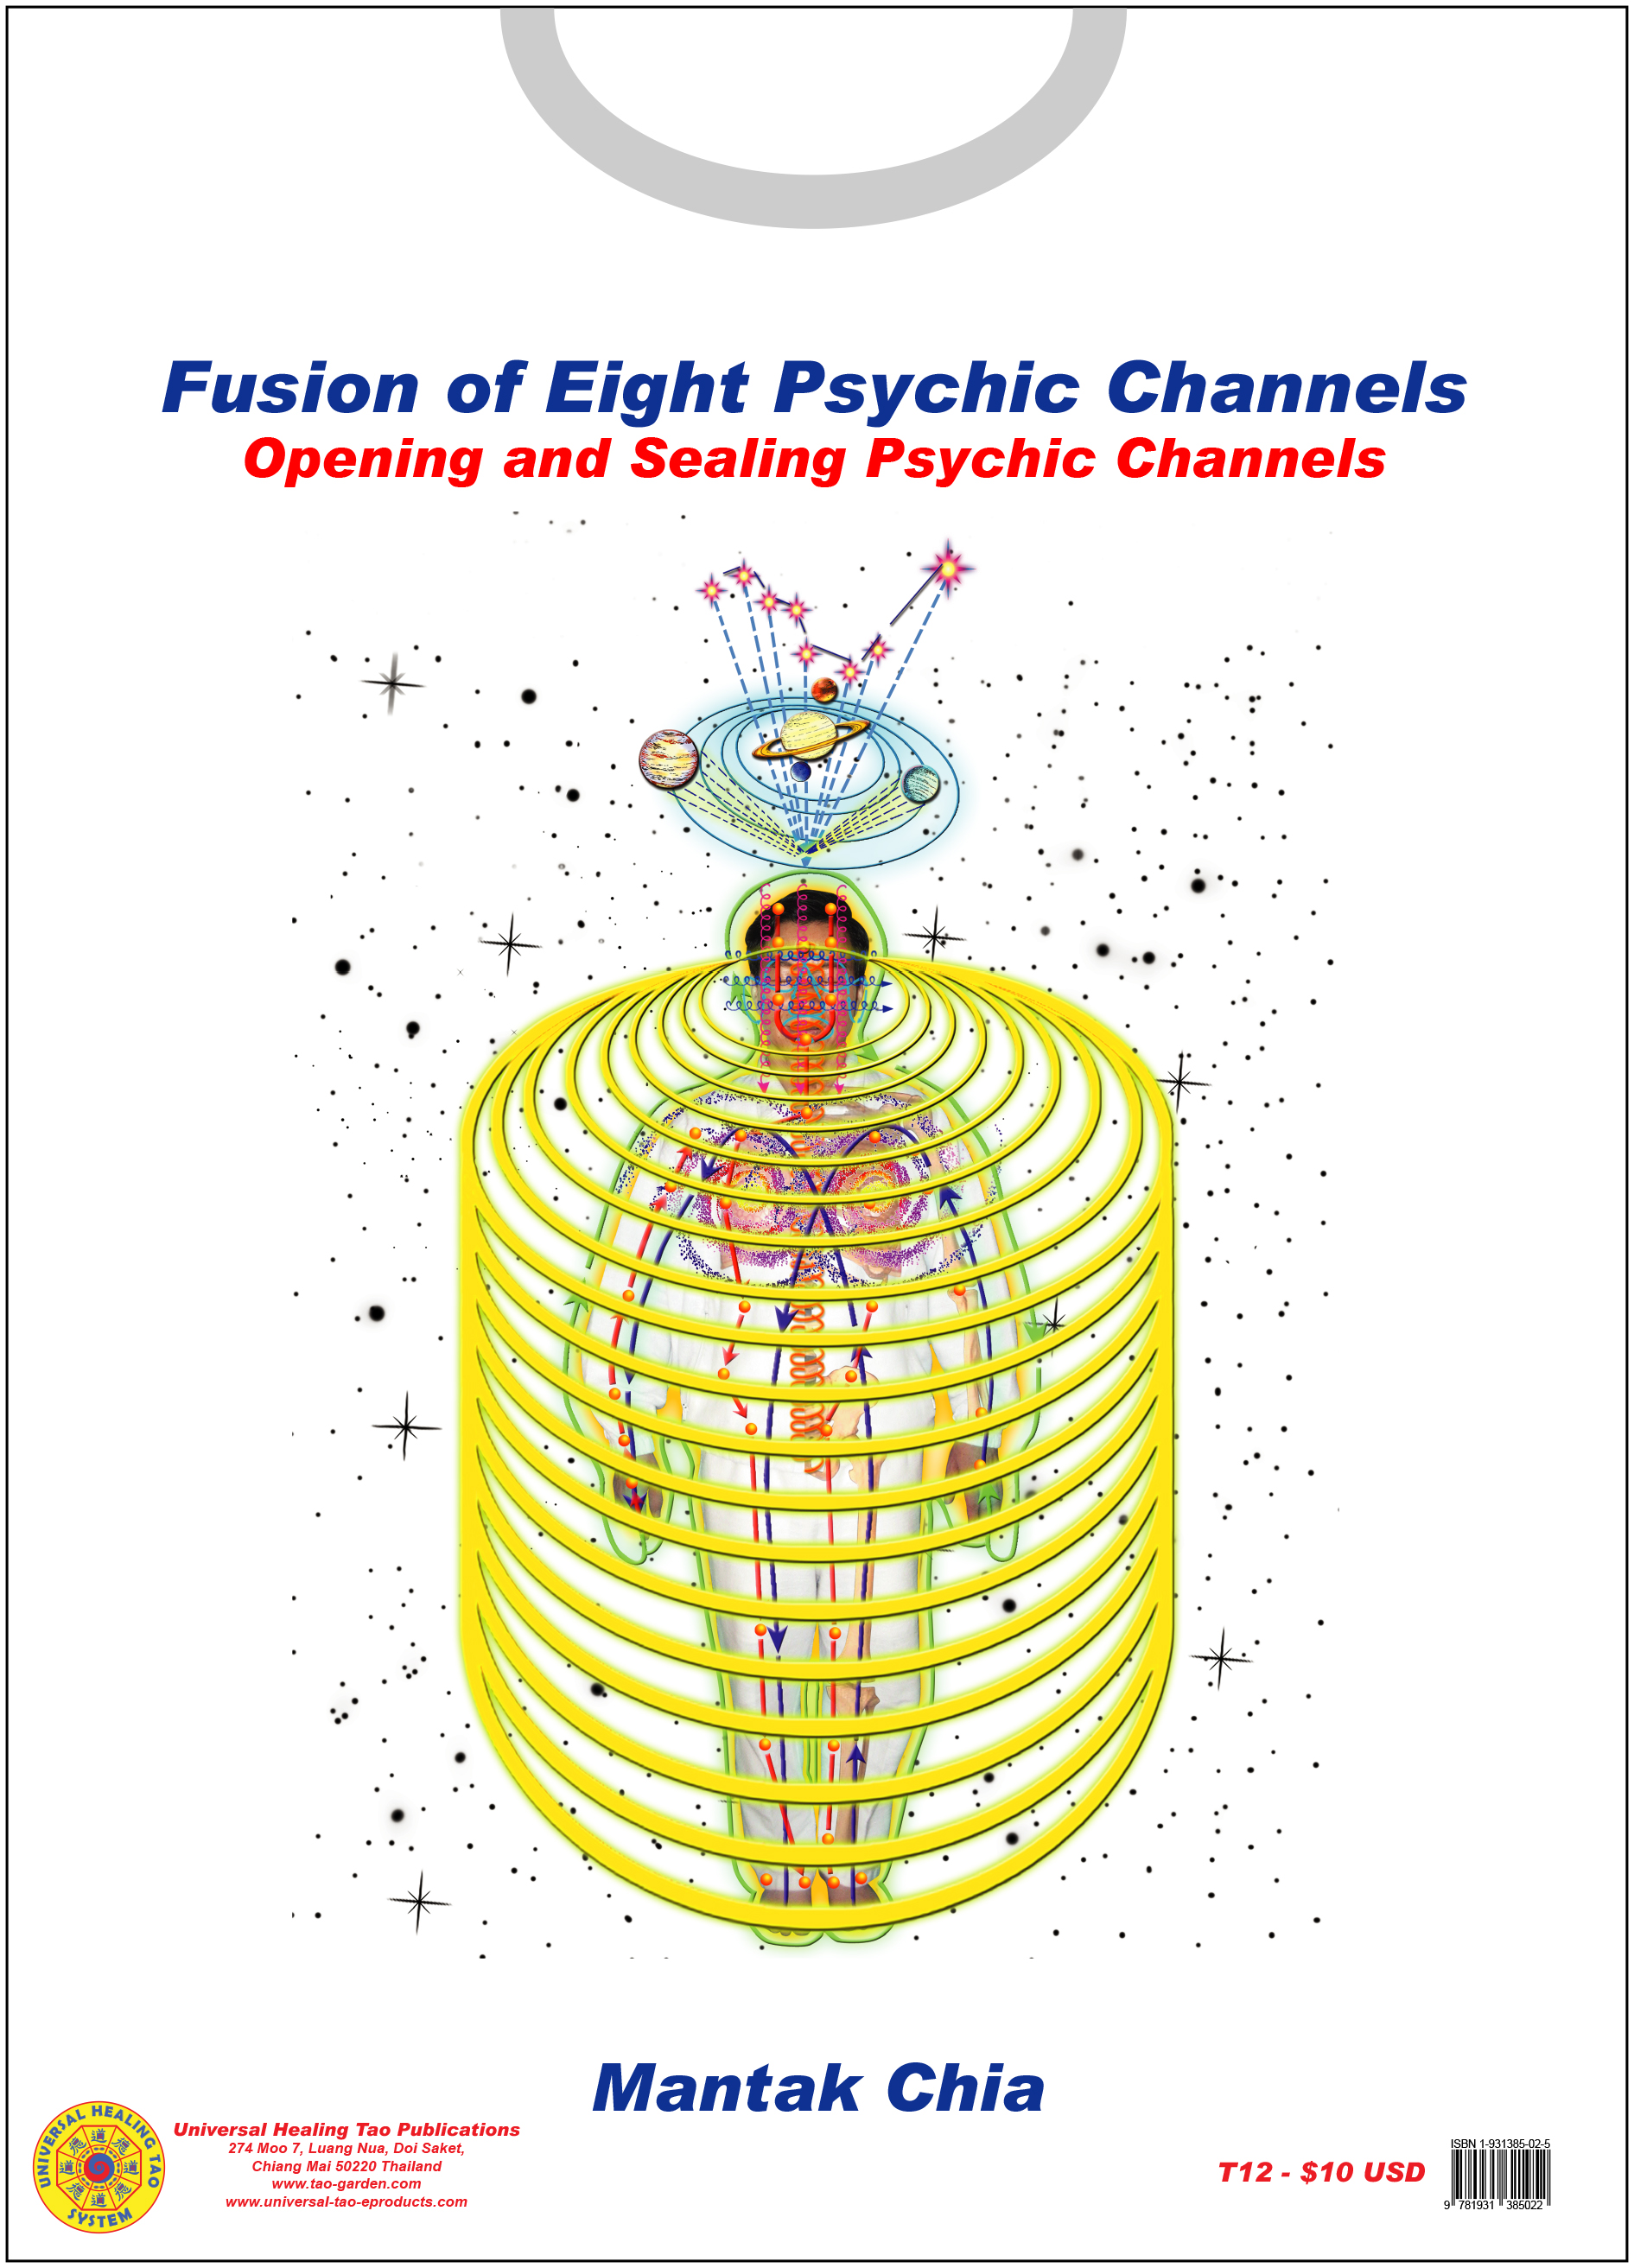 Fusion of Eight Psychic Channels (E-T-Shirt) [DL-T12]